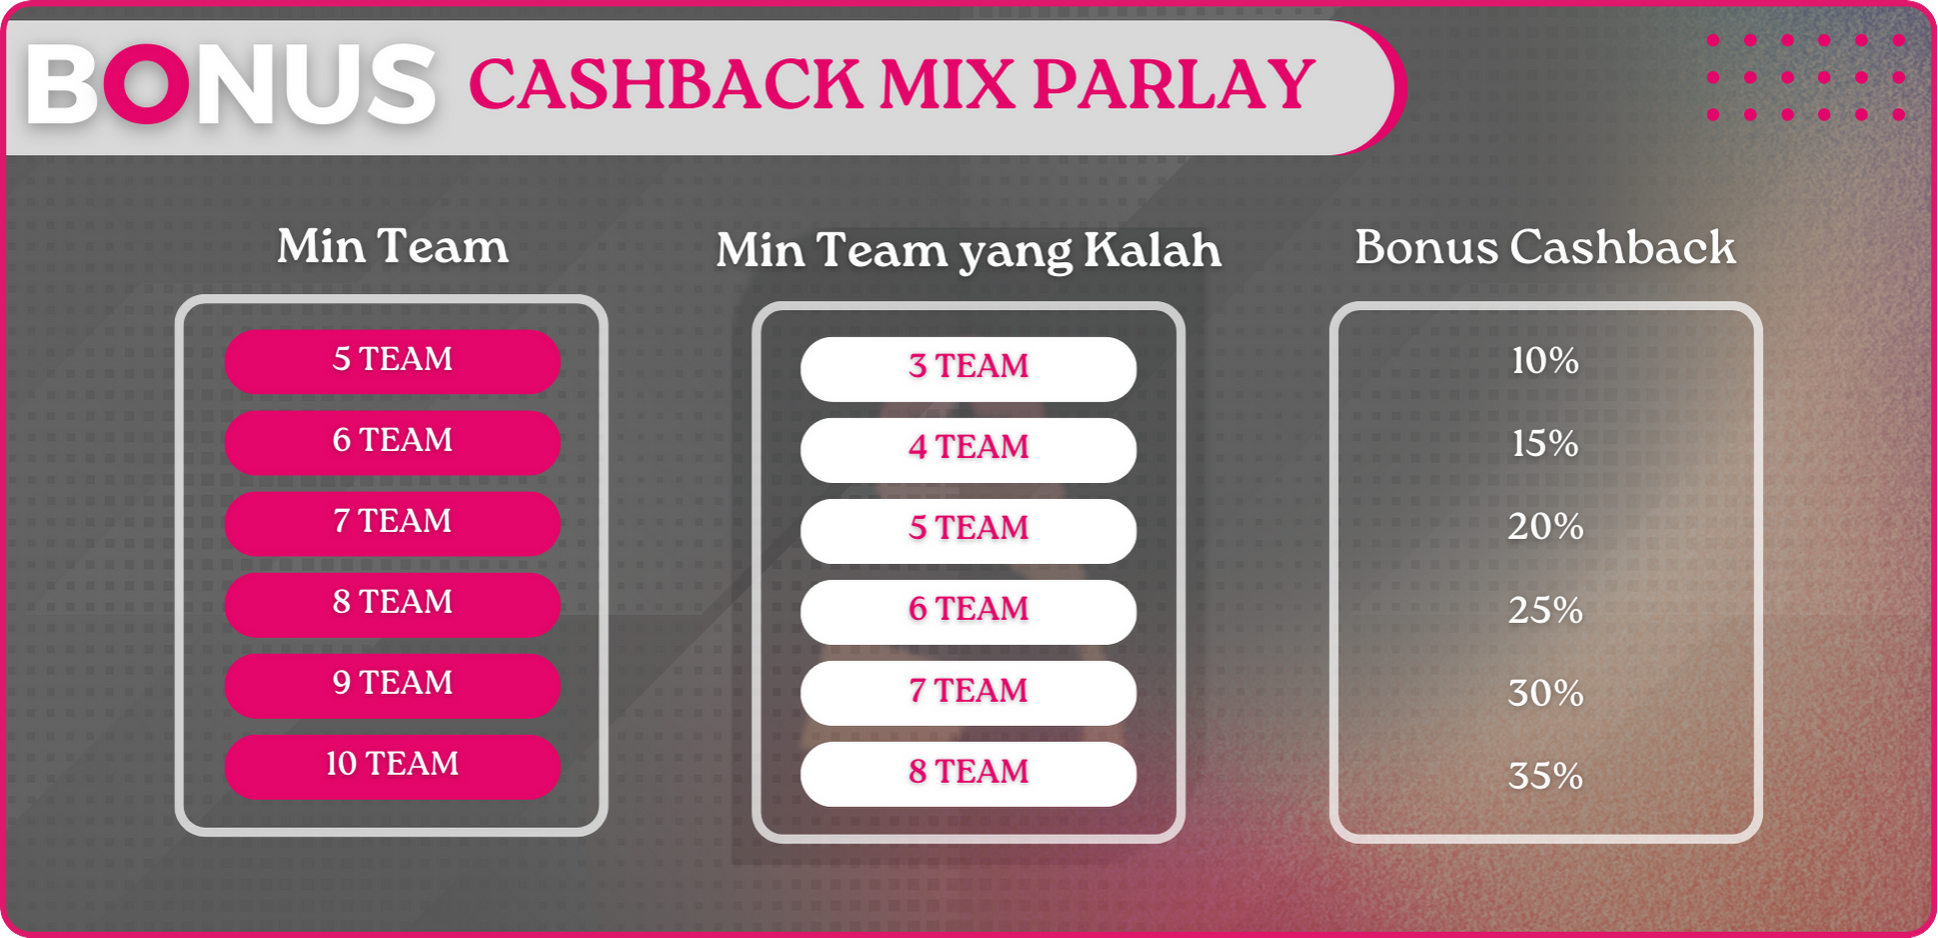 CASHBACK MIX PARLAY UP TO 35% 